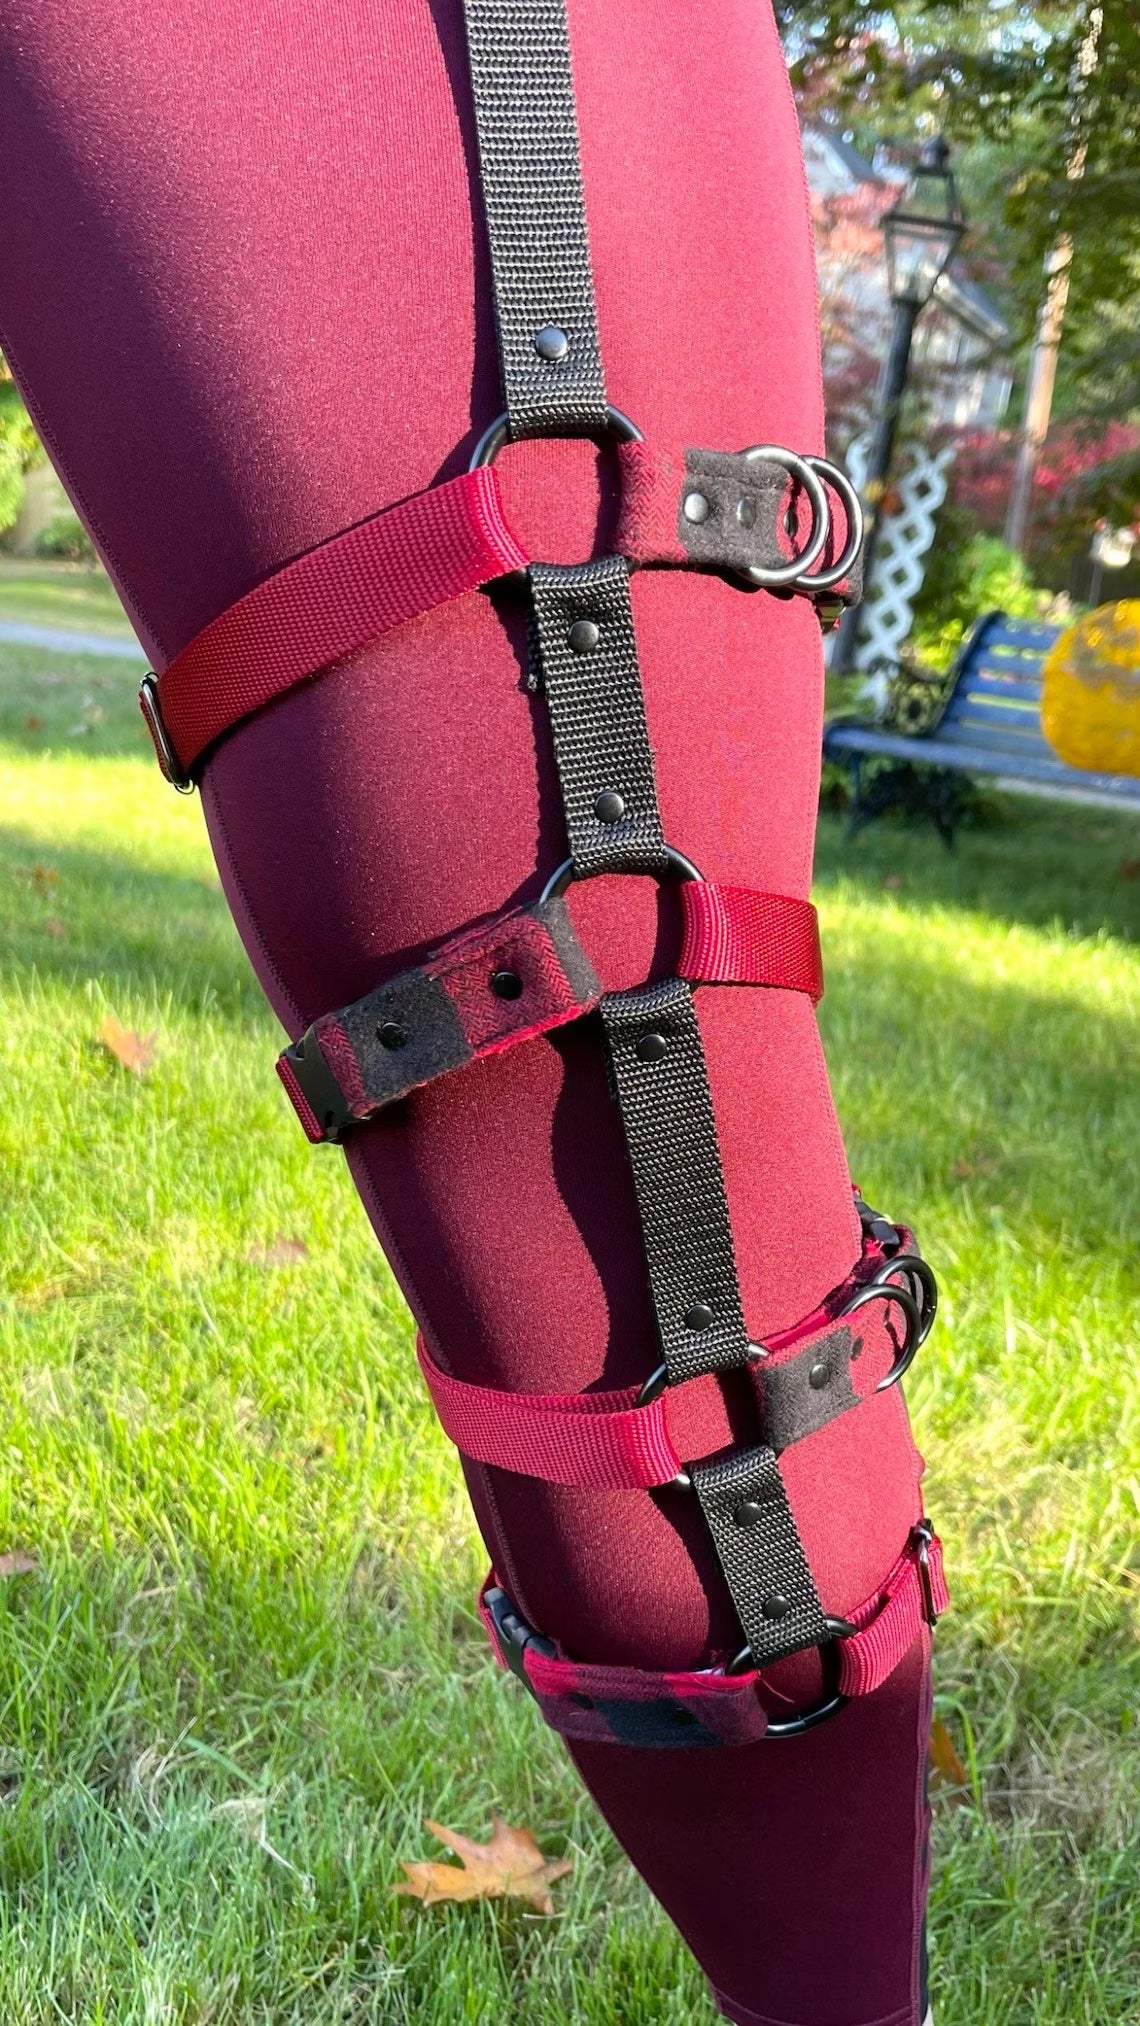 A model bound in the Leg harness. There is a long vertical strap that goes from the waist down to the calves and four horizontal straps that give it a cage look.